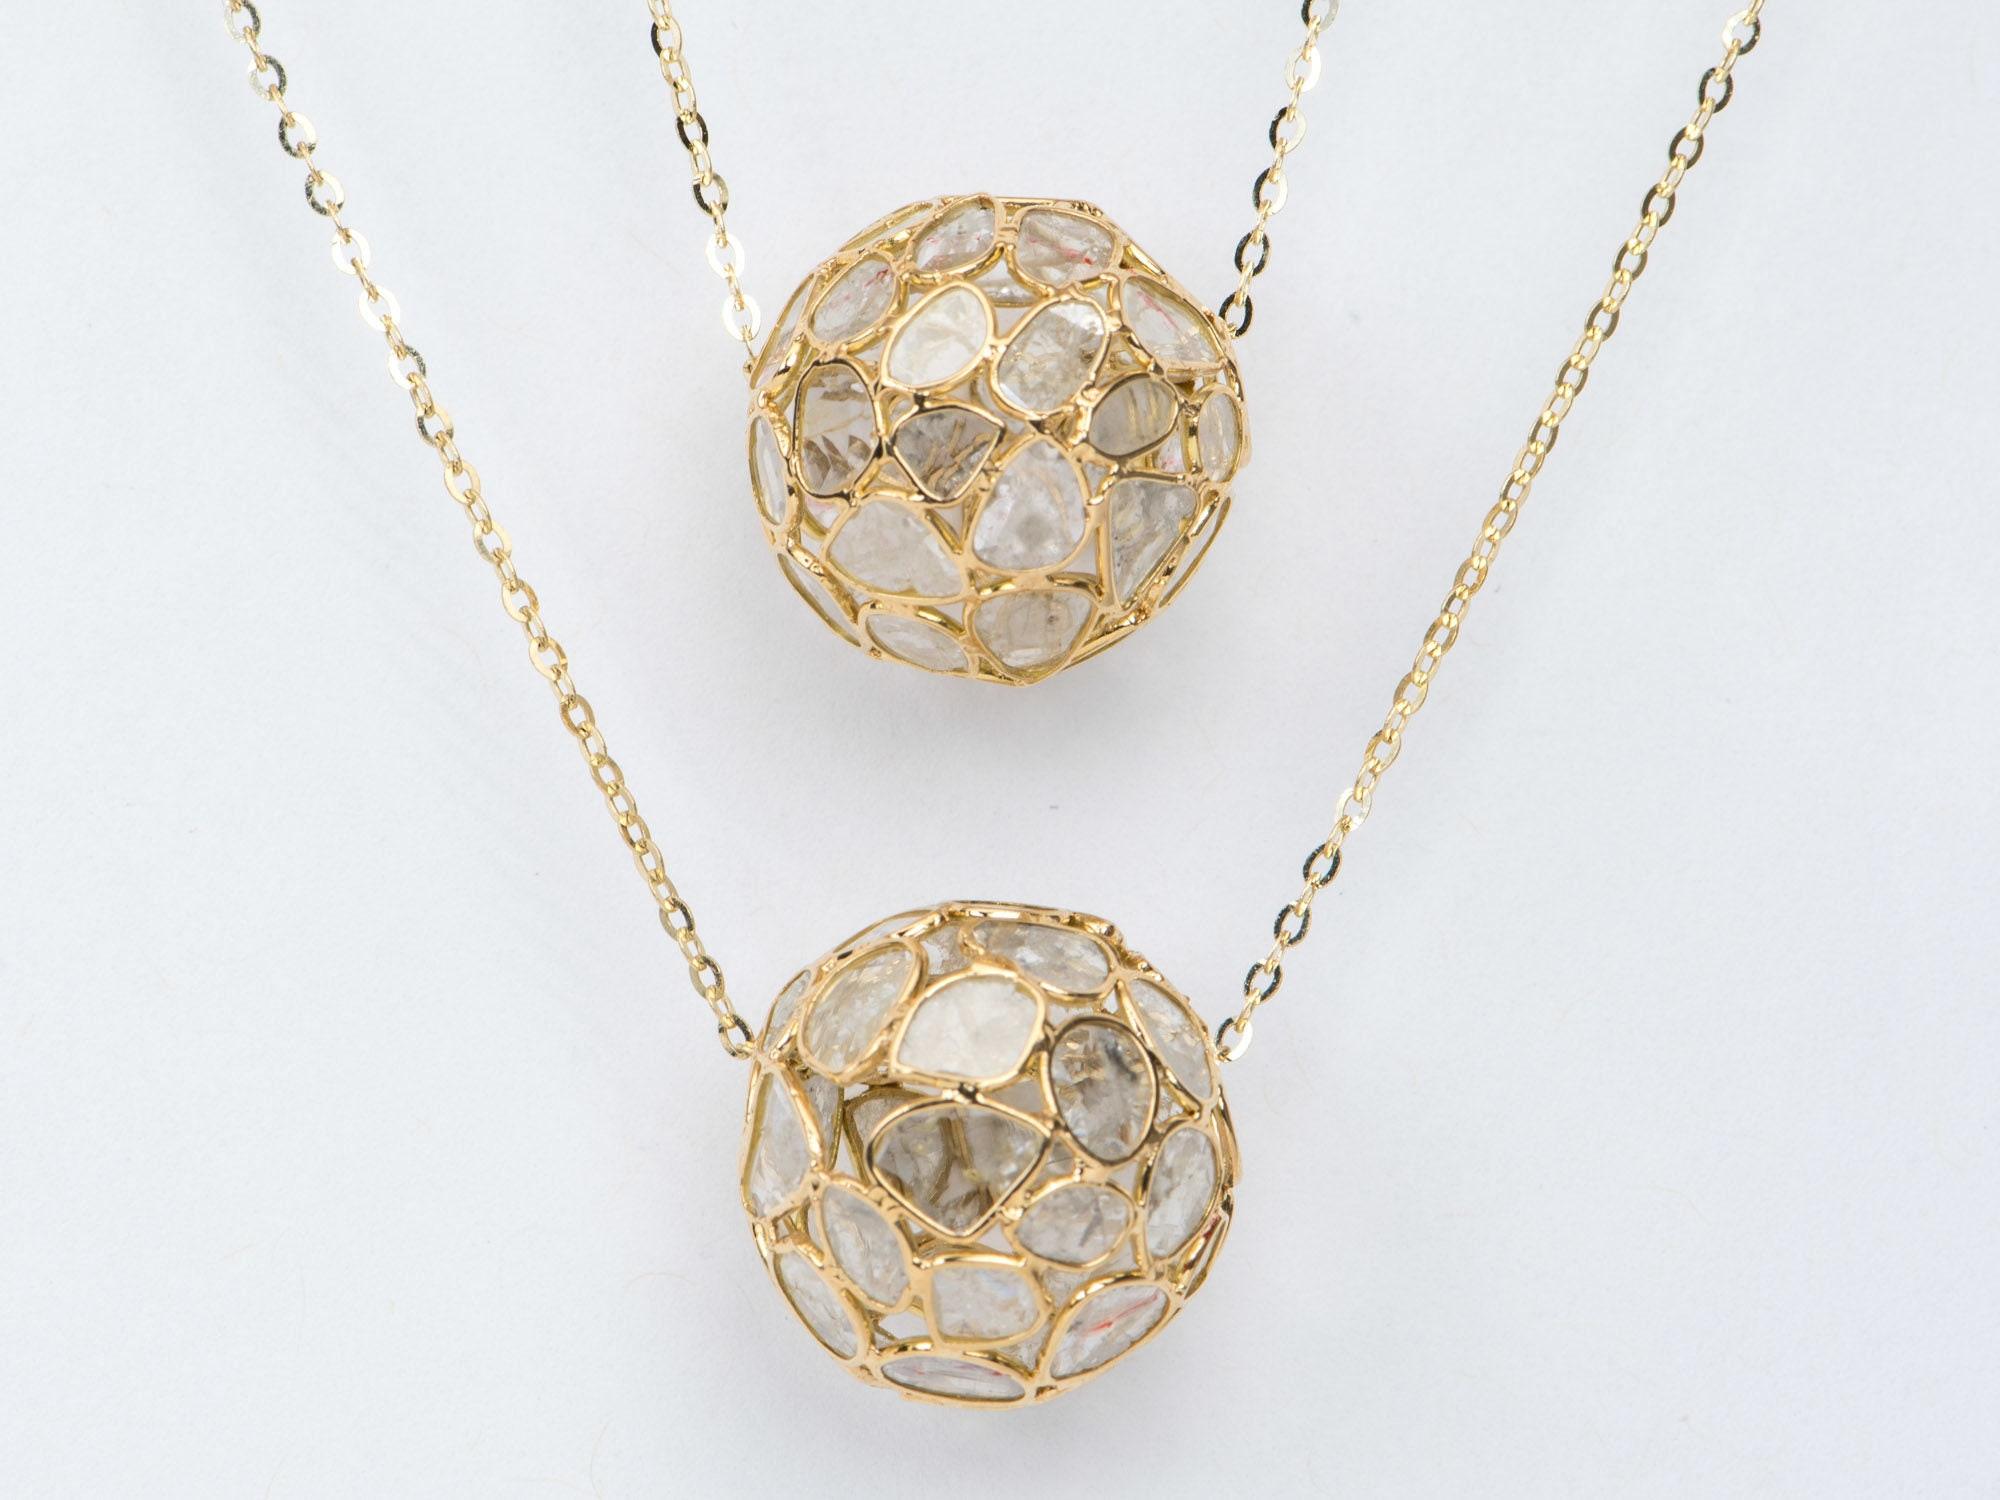 â™¥  A solid 18K yellow gold diamond slice ball pendant 
â™¥  This pendant measures 18mm

â™¥ Material: 18K yellow gold
â™¥ Gemstone: Diamond slices
â™¥ All gemstones used are genuine, earth-mined, and guaranteed conflict-free!

â™¥  The necklace